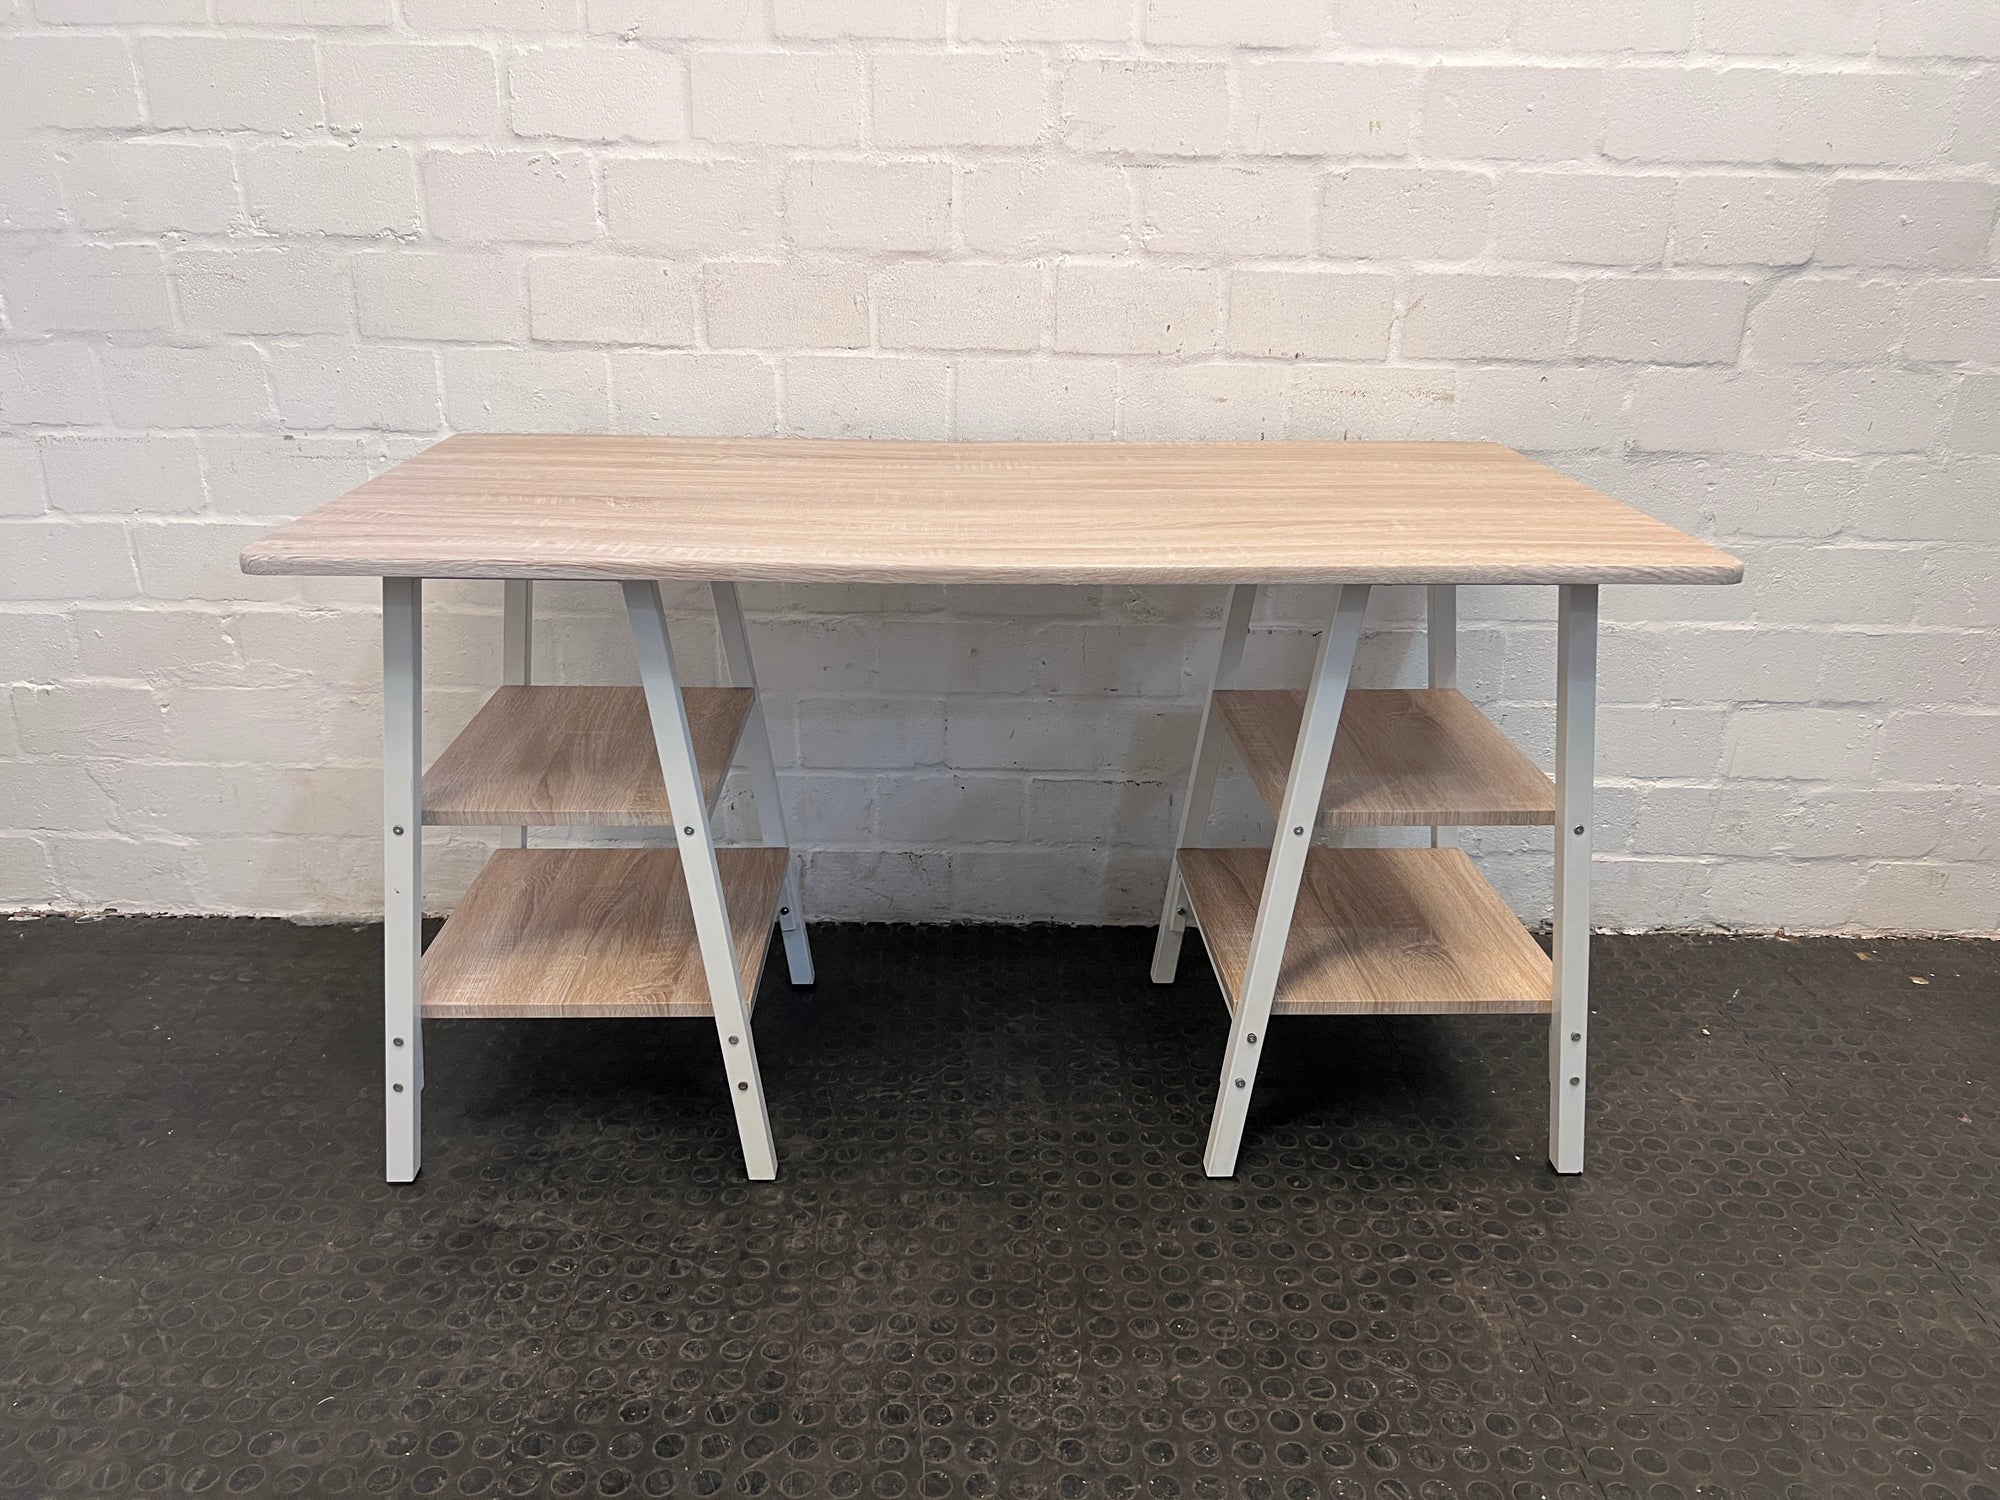 Light Wood Print Office Desk with Steel Legs and Shelves